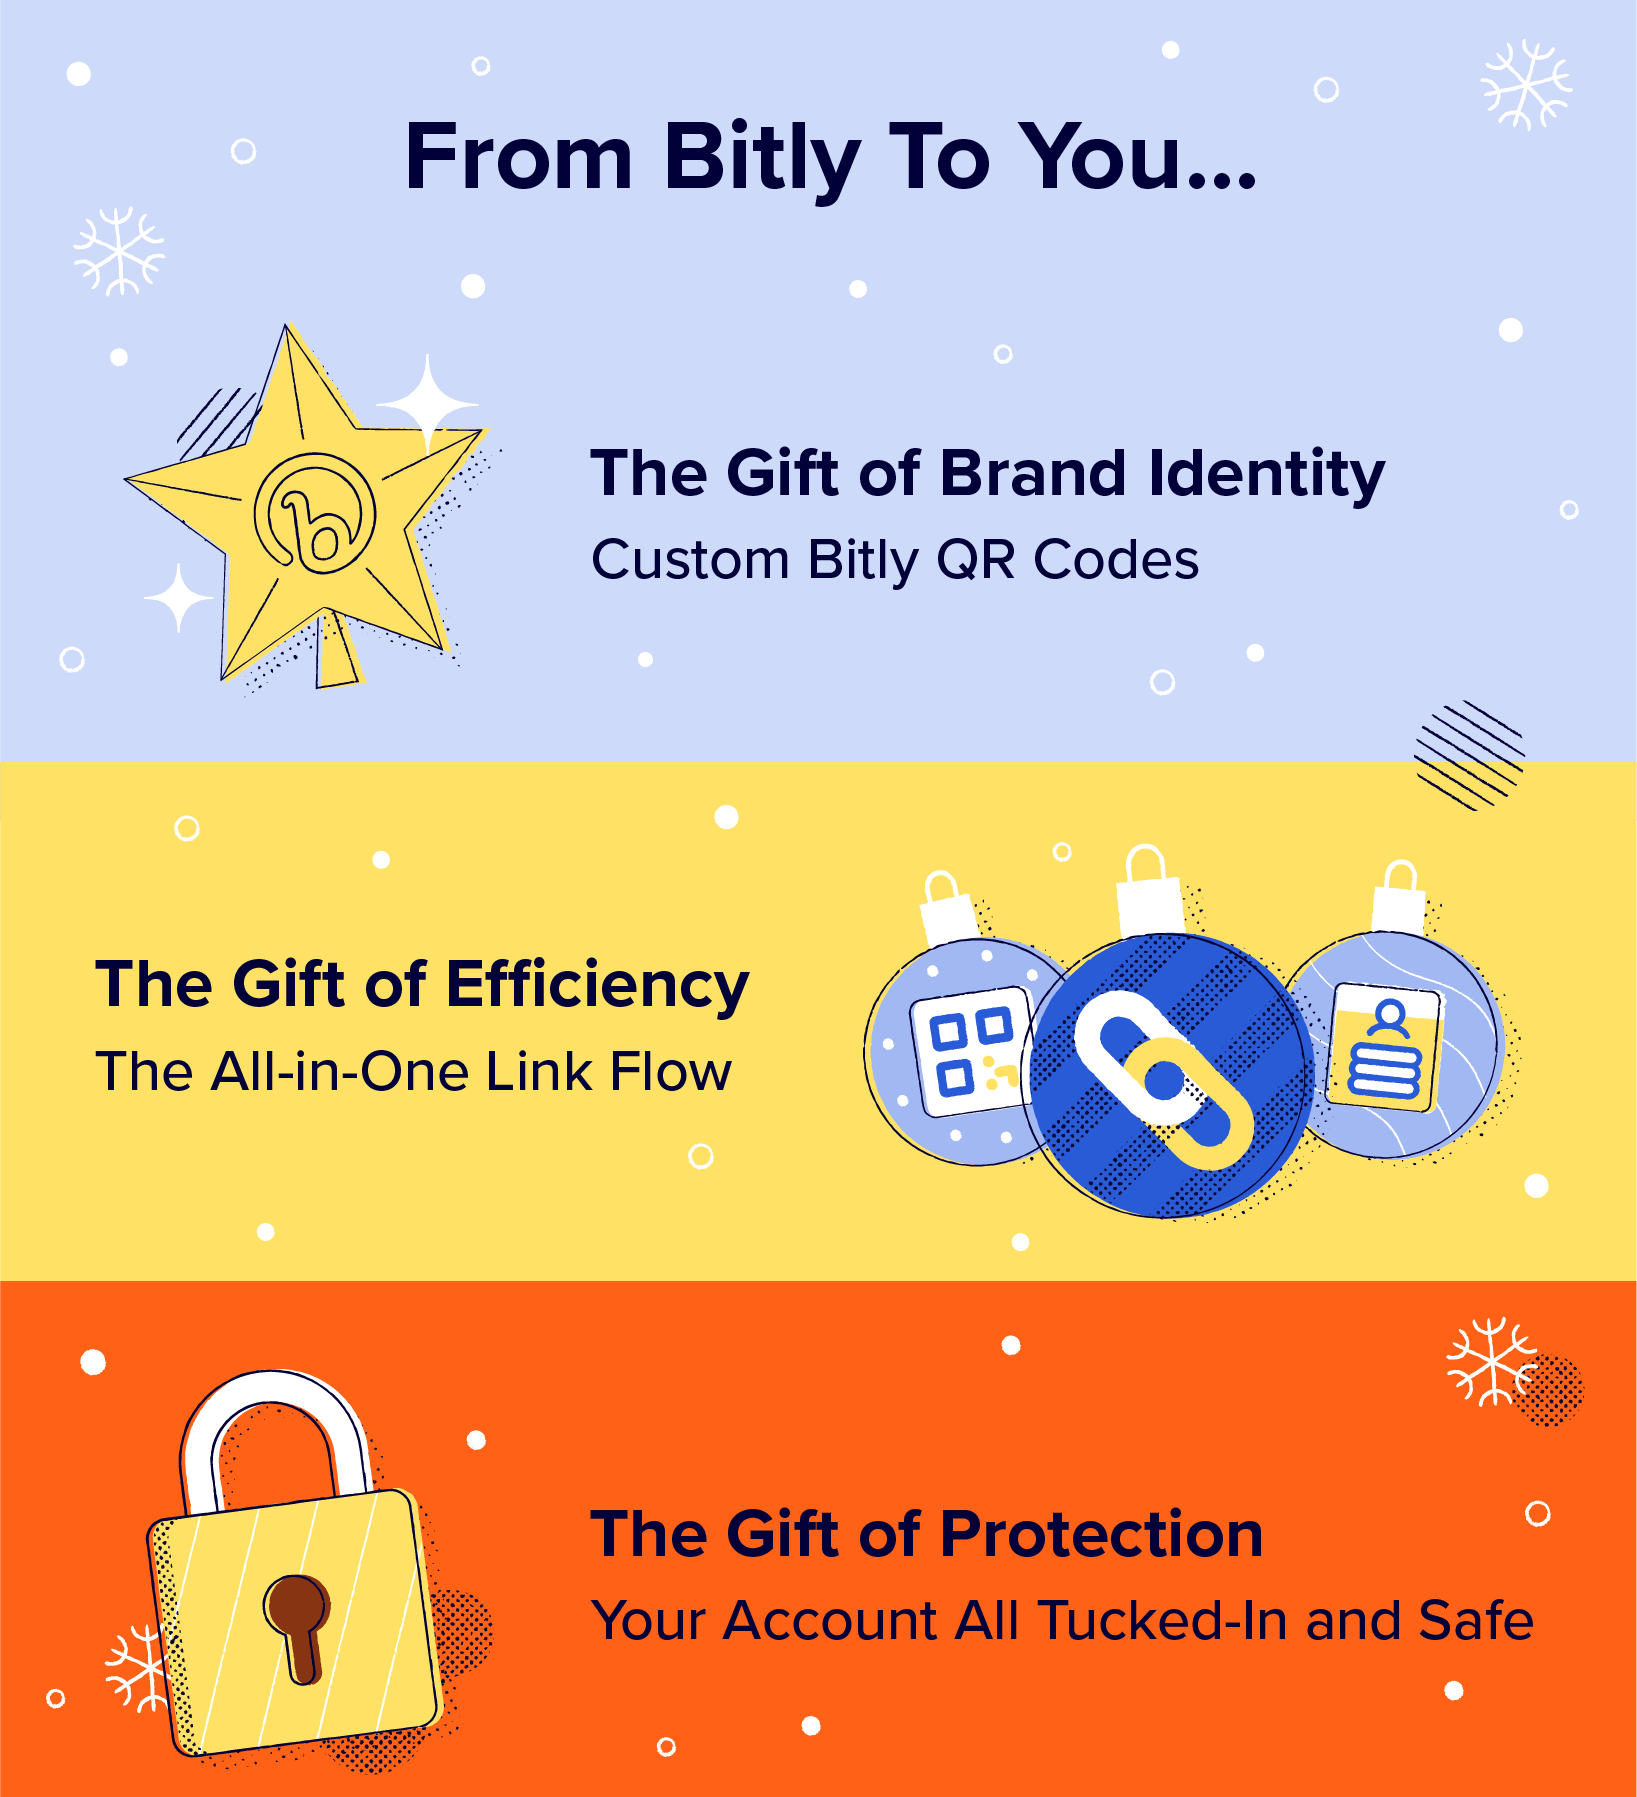 Infographic showcasing custom Bitly QR Codes, the Connections Platform, and account protection.